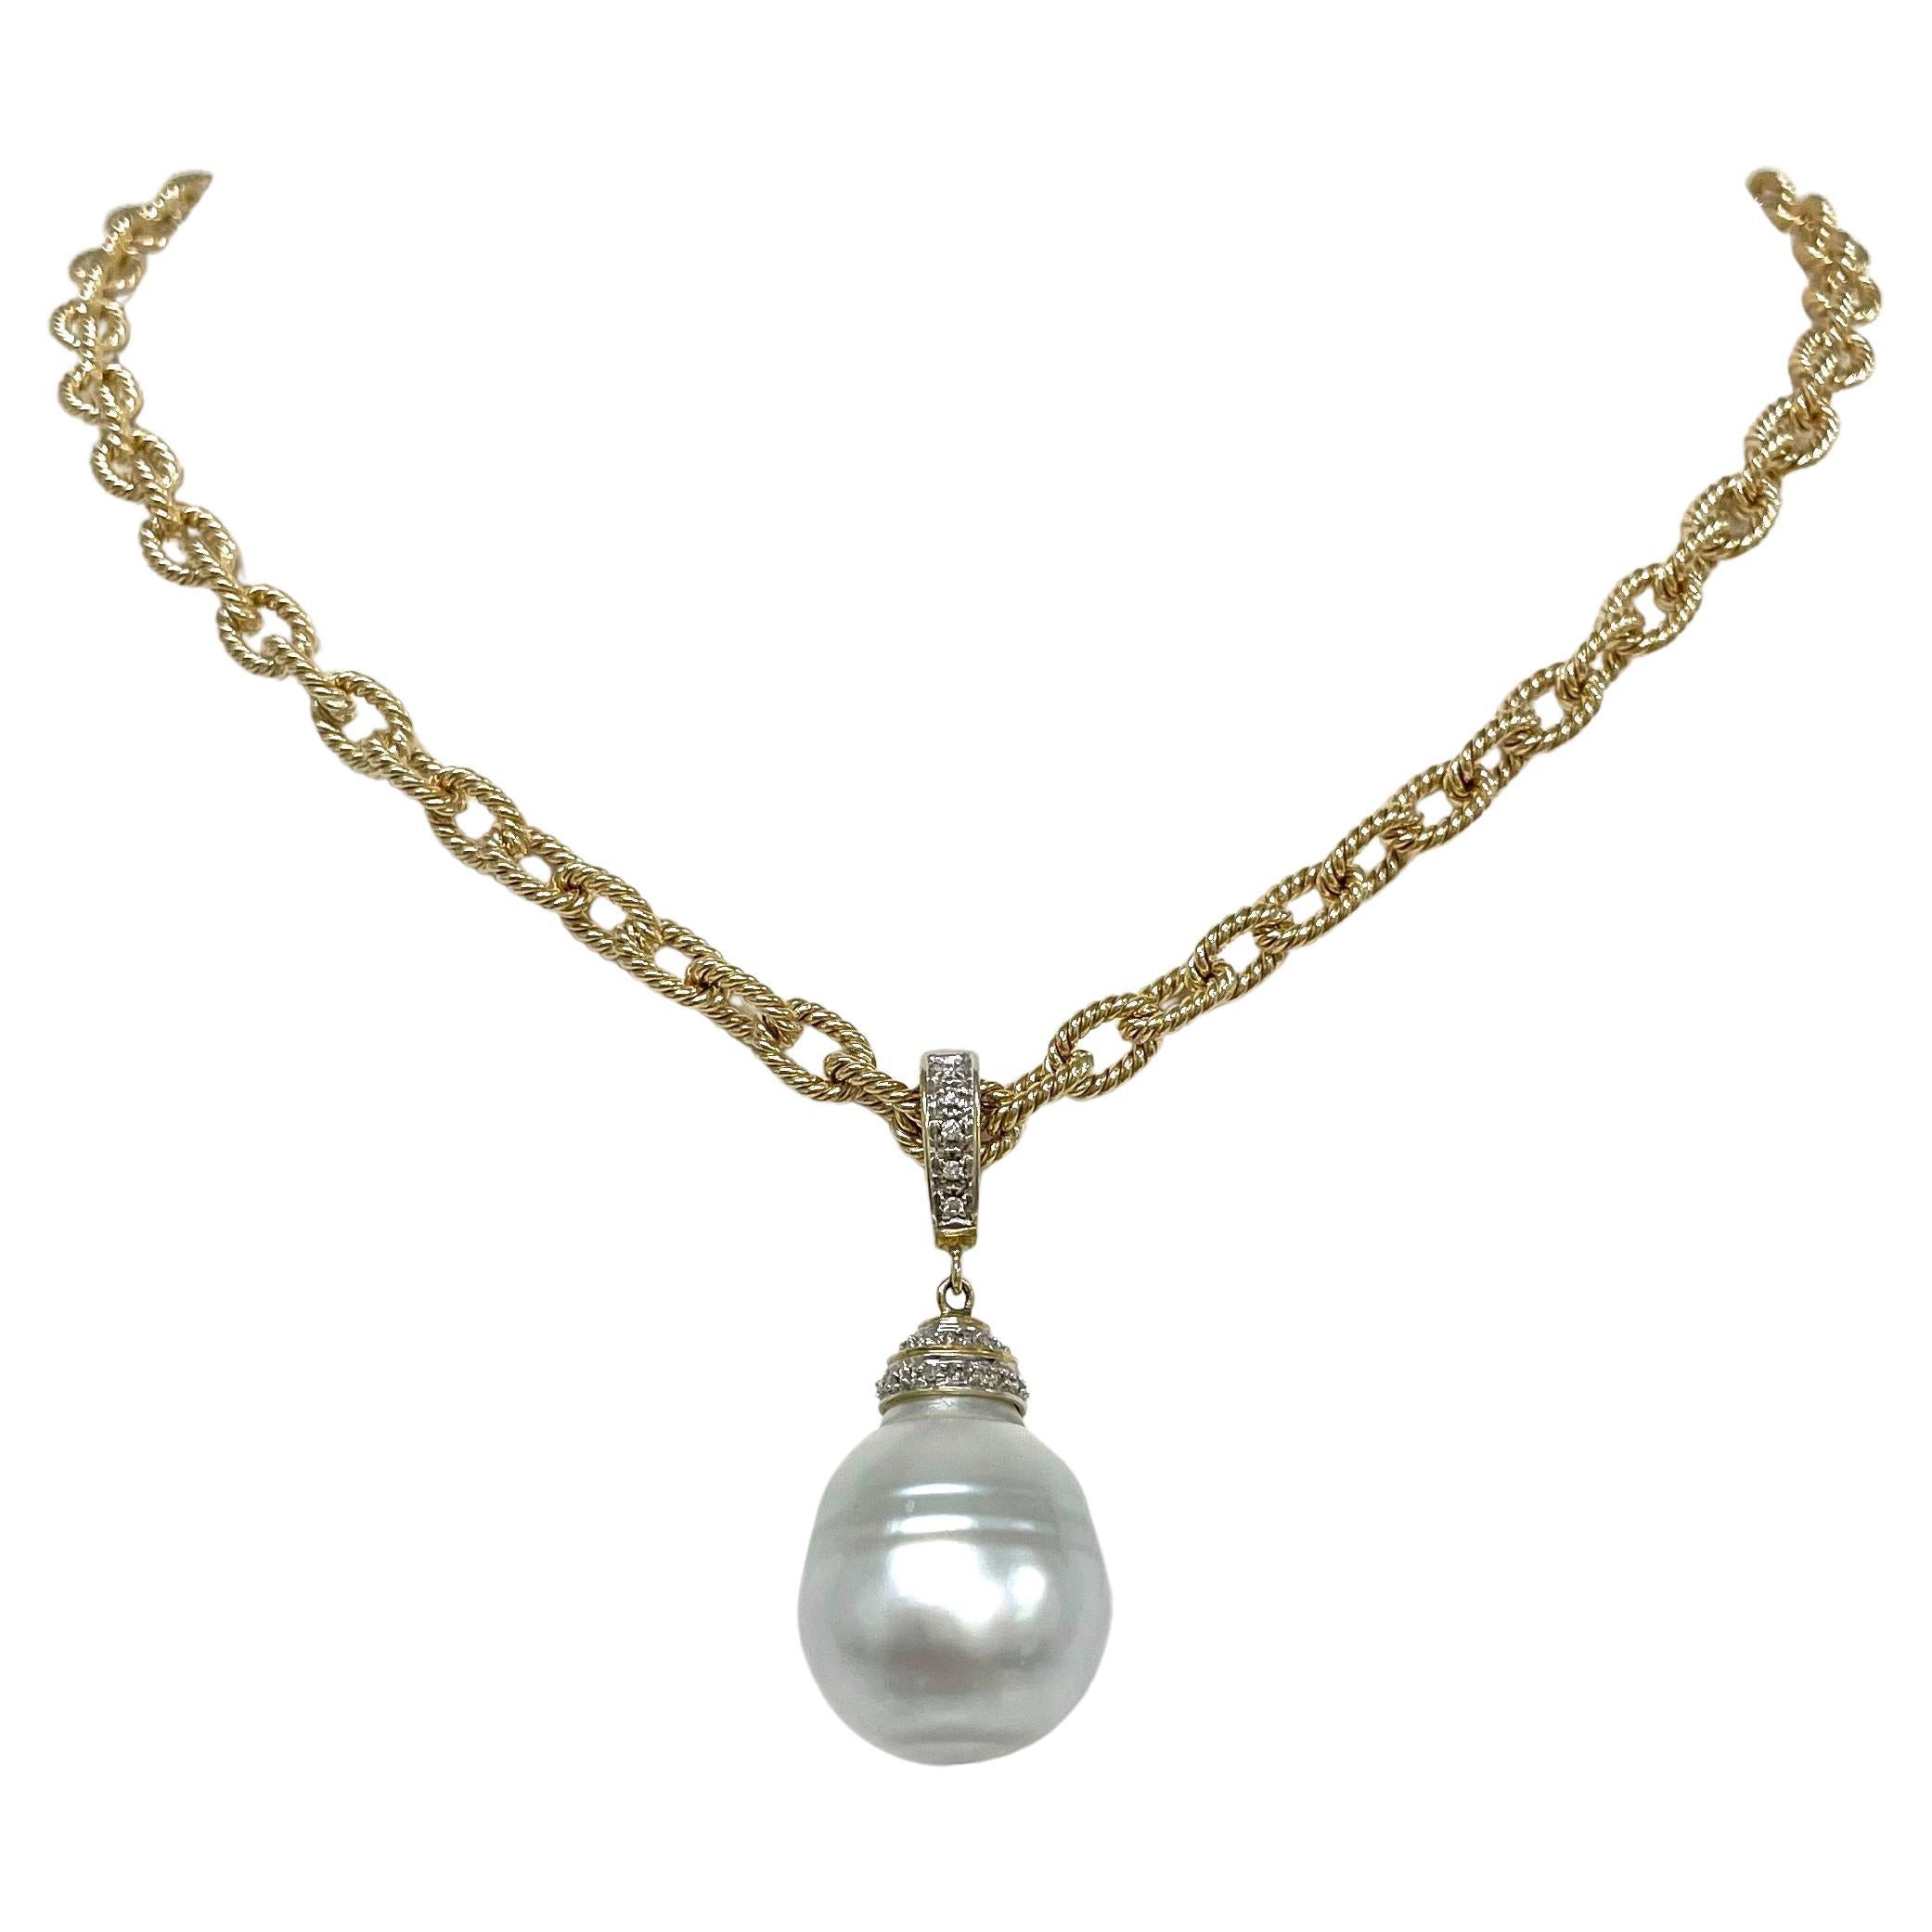 Description
Large 23x18.5mm South Sea pearl with diamonds suspended from an exquisite handmade 14k yellow gold link chain.
Item # N1859

Materials and Weight
South Sea pearl 23x18.5mm, semi-round shape
Pave diamonds 14k yellow gold
14k yellow gold